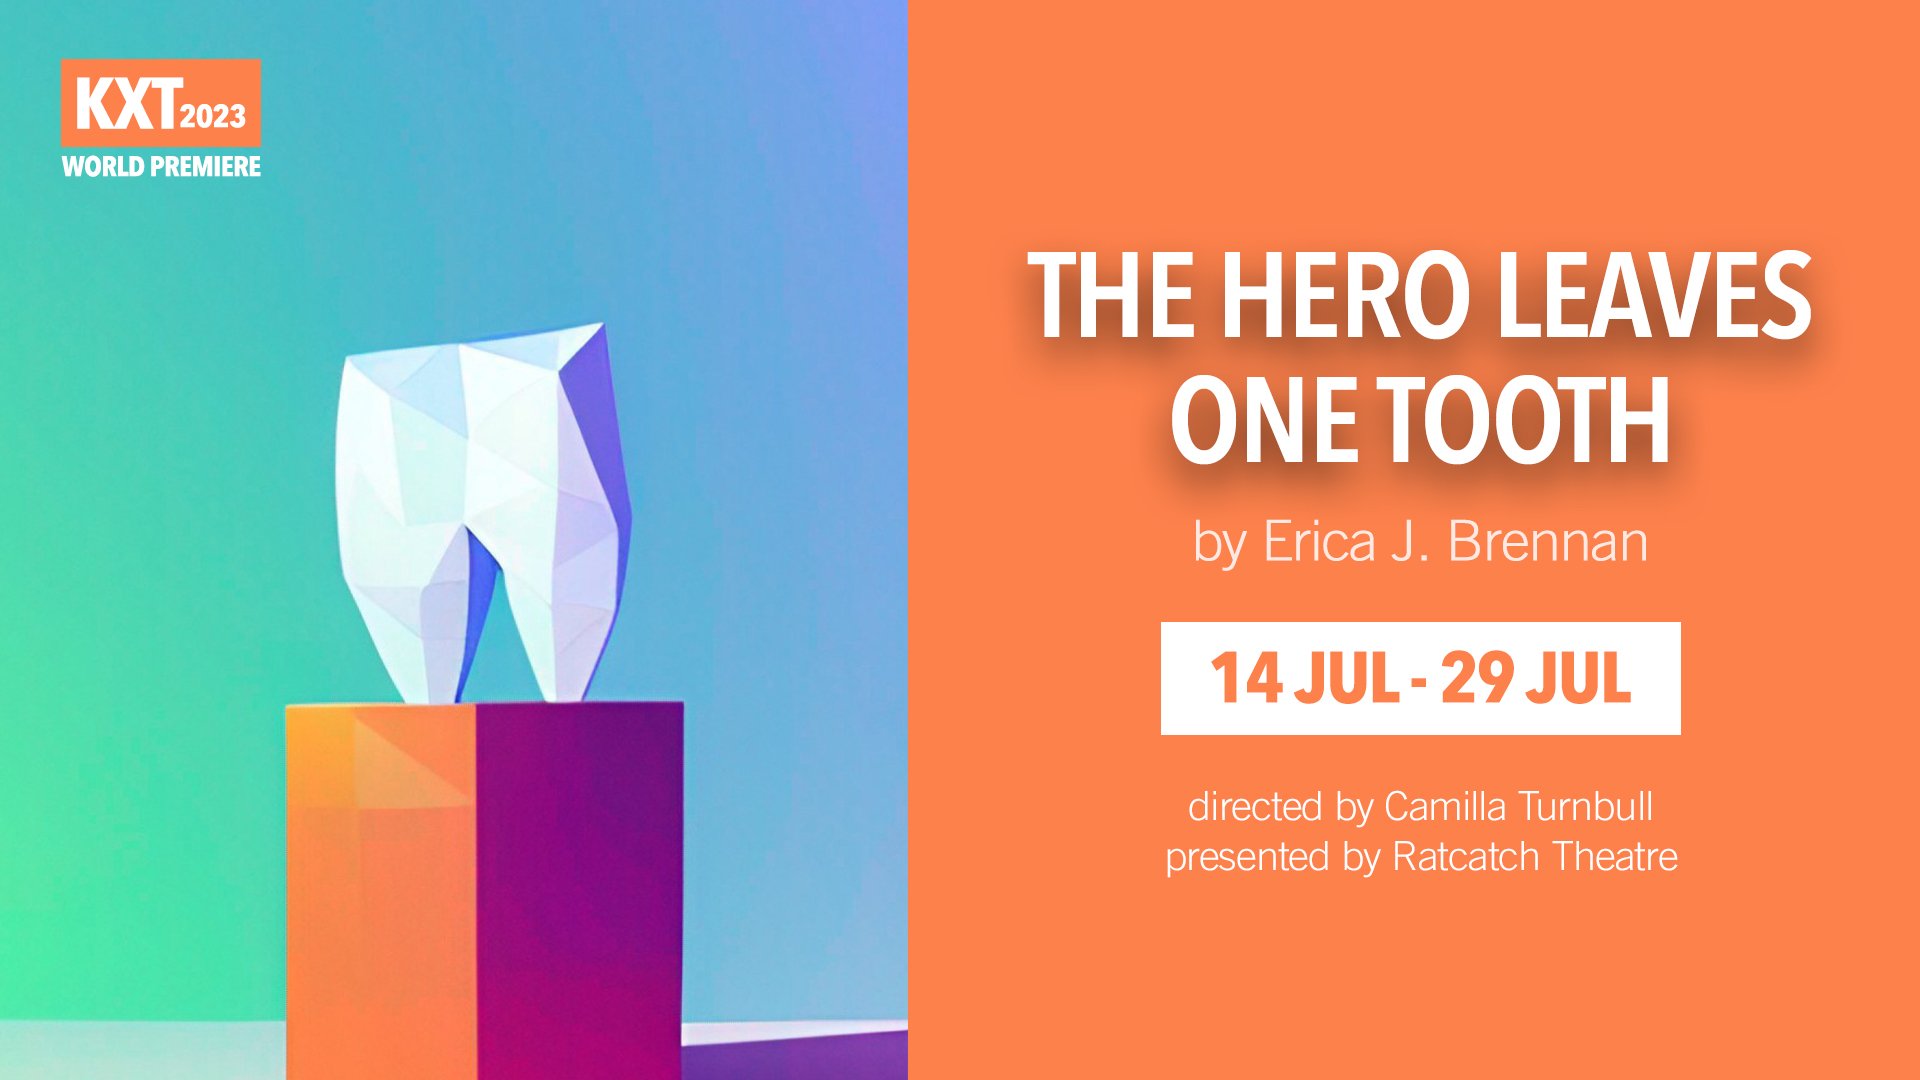 A graphic of a tooth on an orange plinth. Text reads "The Hero Leaves One Tooth by Erica J. Brennan / 14 Jul- 29 Jul / directed by Camilla Turnbull / produced by Ratcatch Theatre".